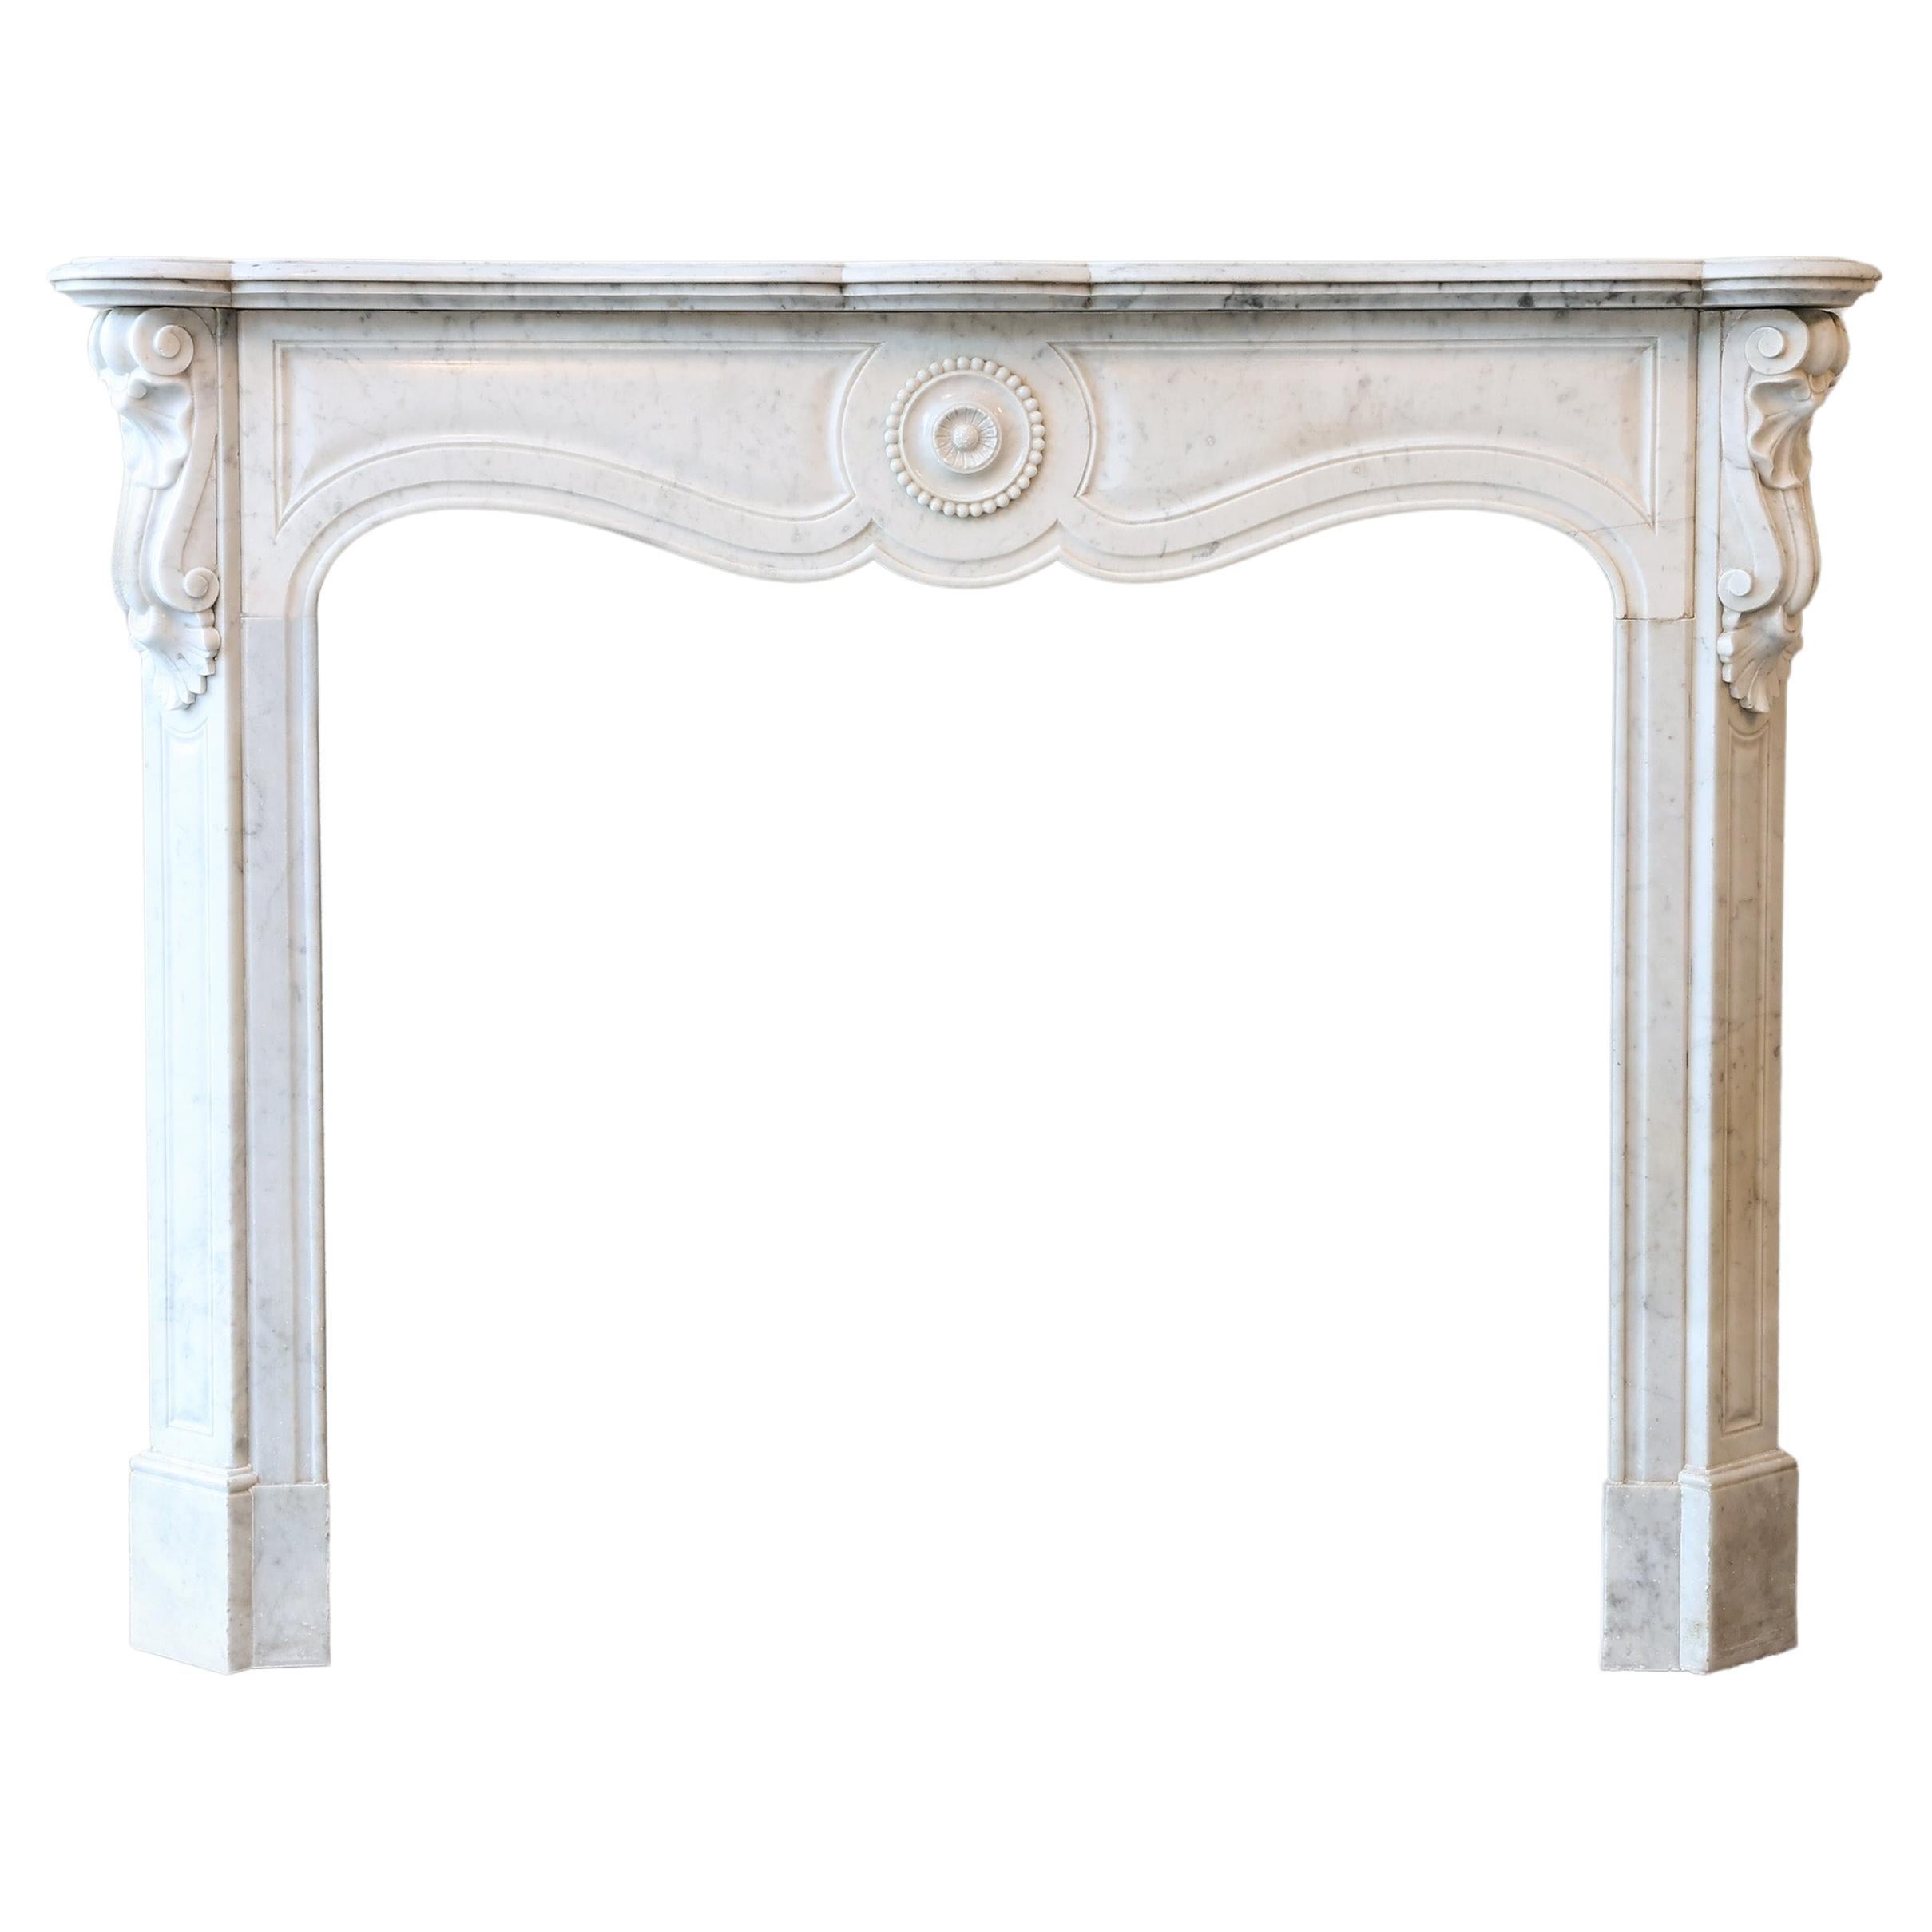 Carrara Marble Fireplace in the Style of Pompadour from the 19th Century For Sale